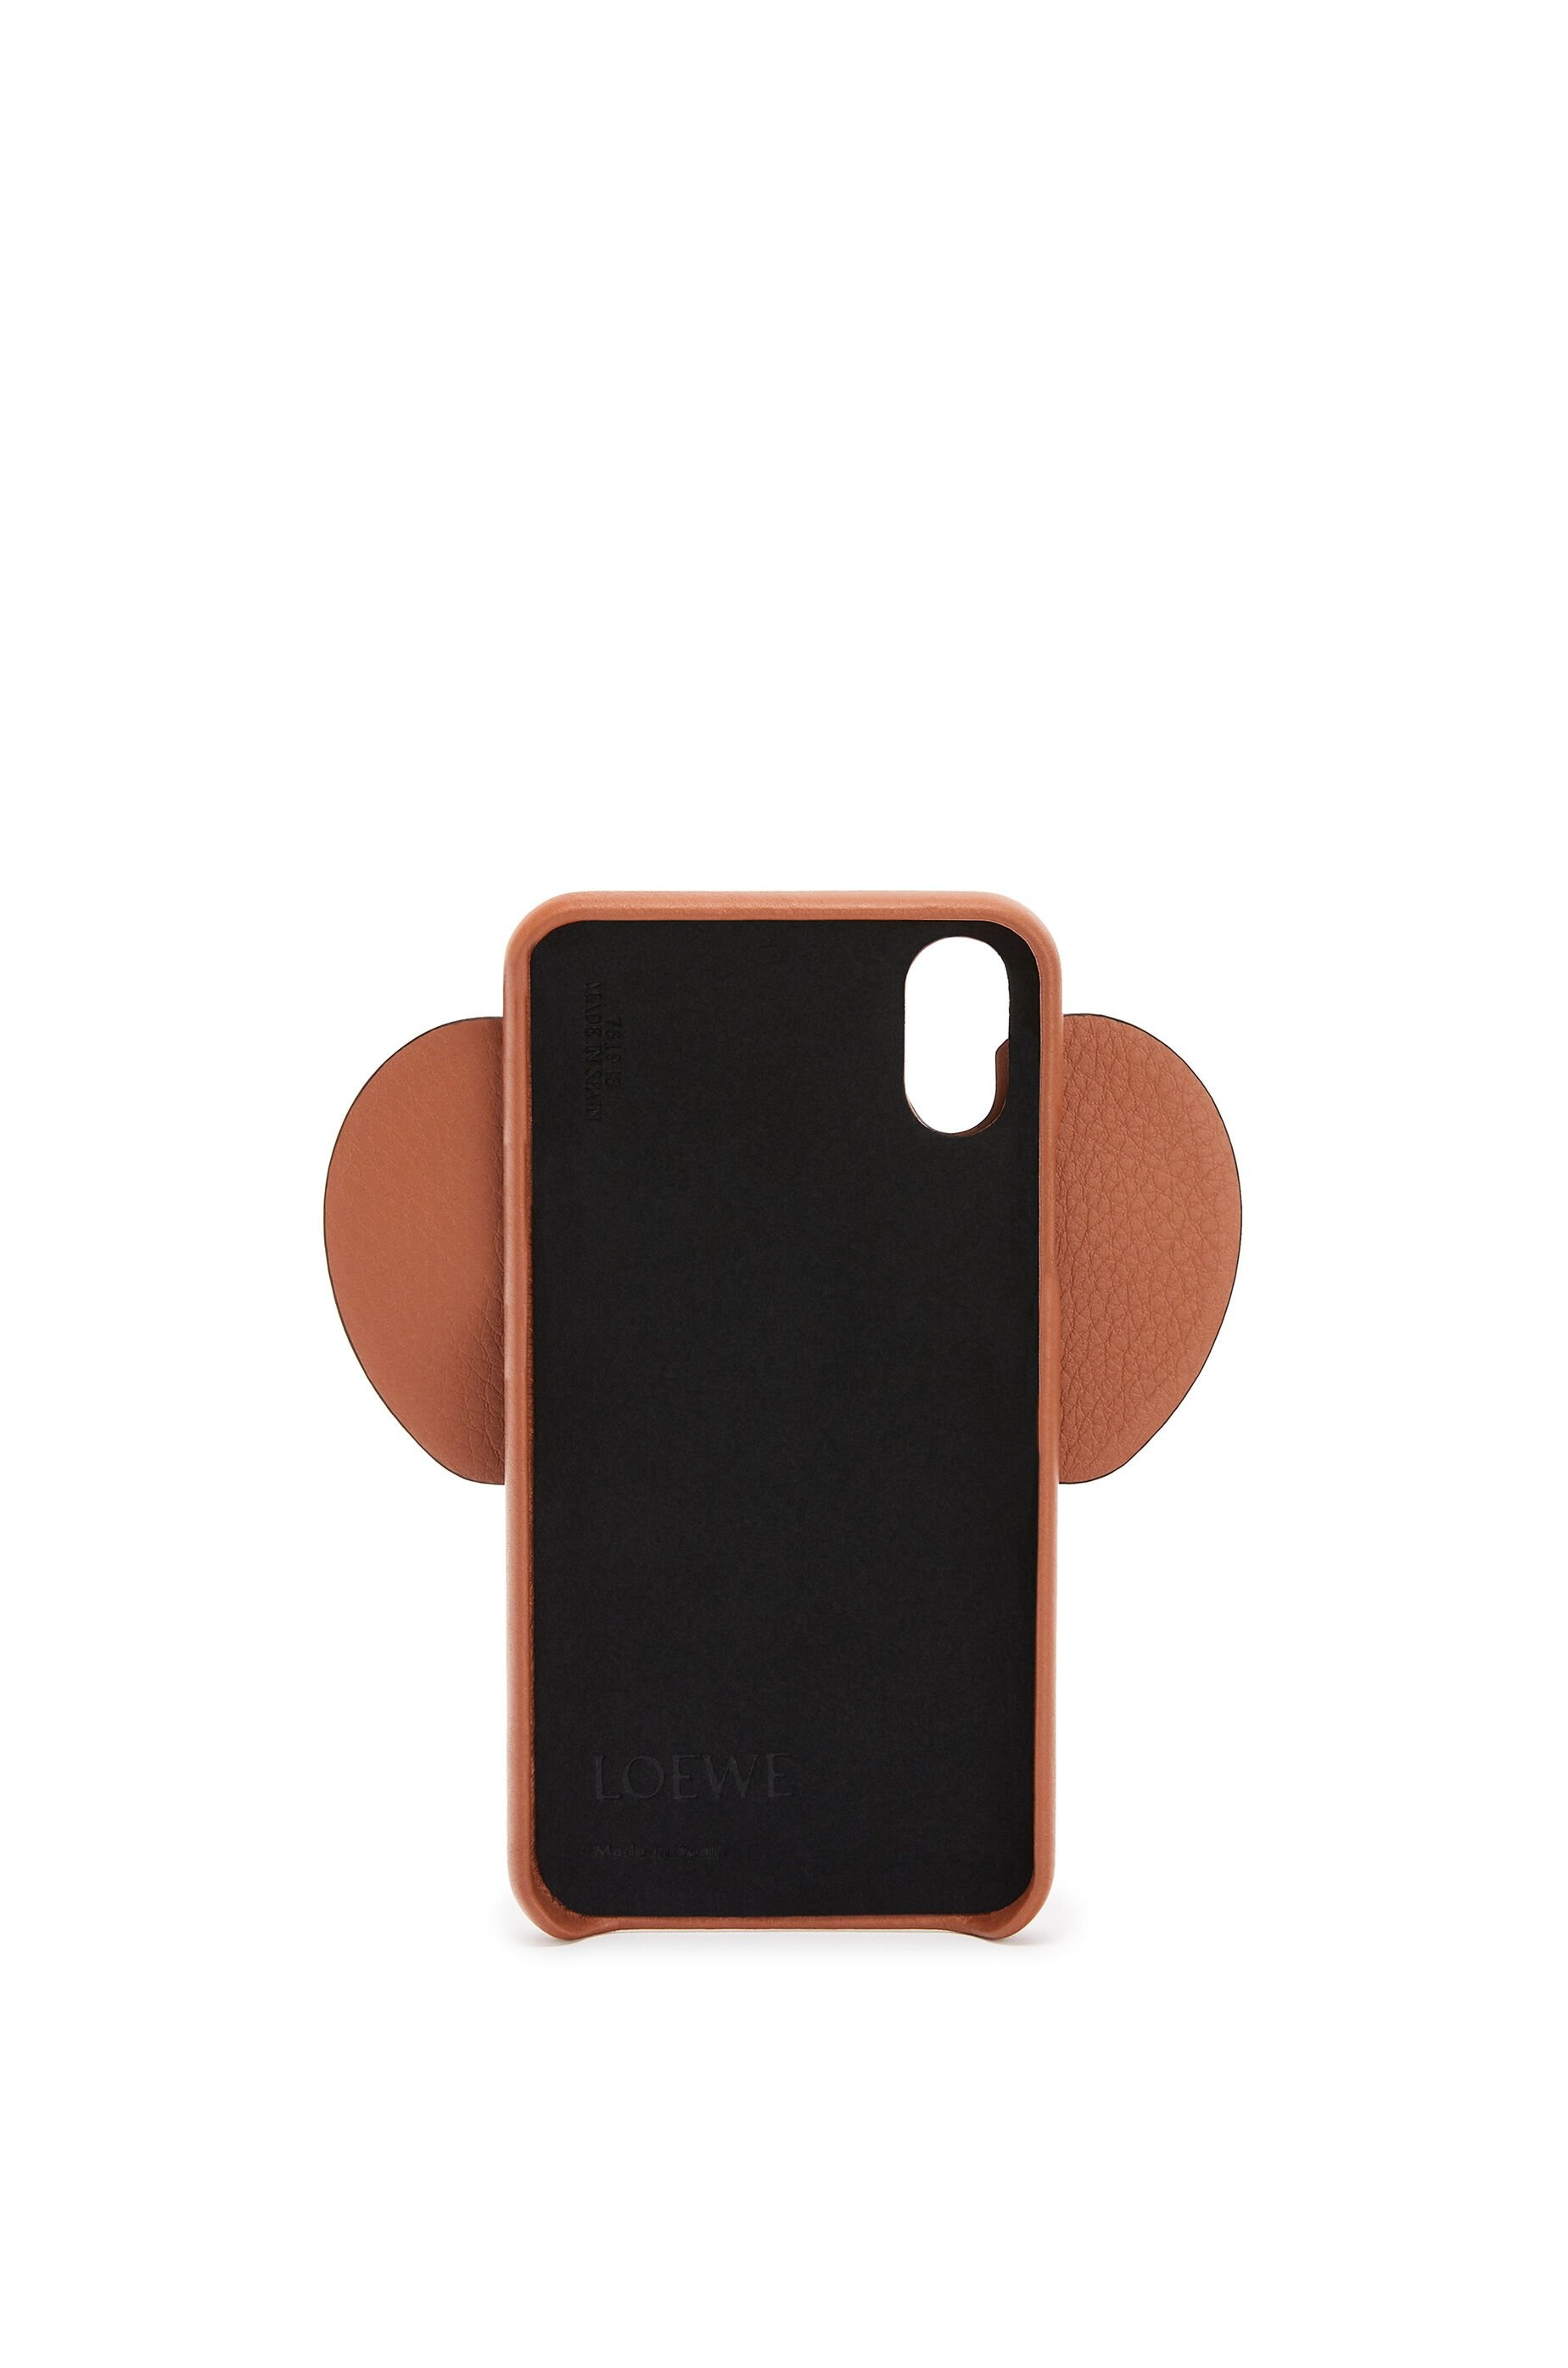 Elephant cover for iPhone X/XS in classic calfskin - 3